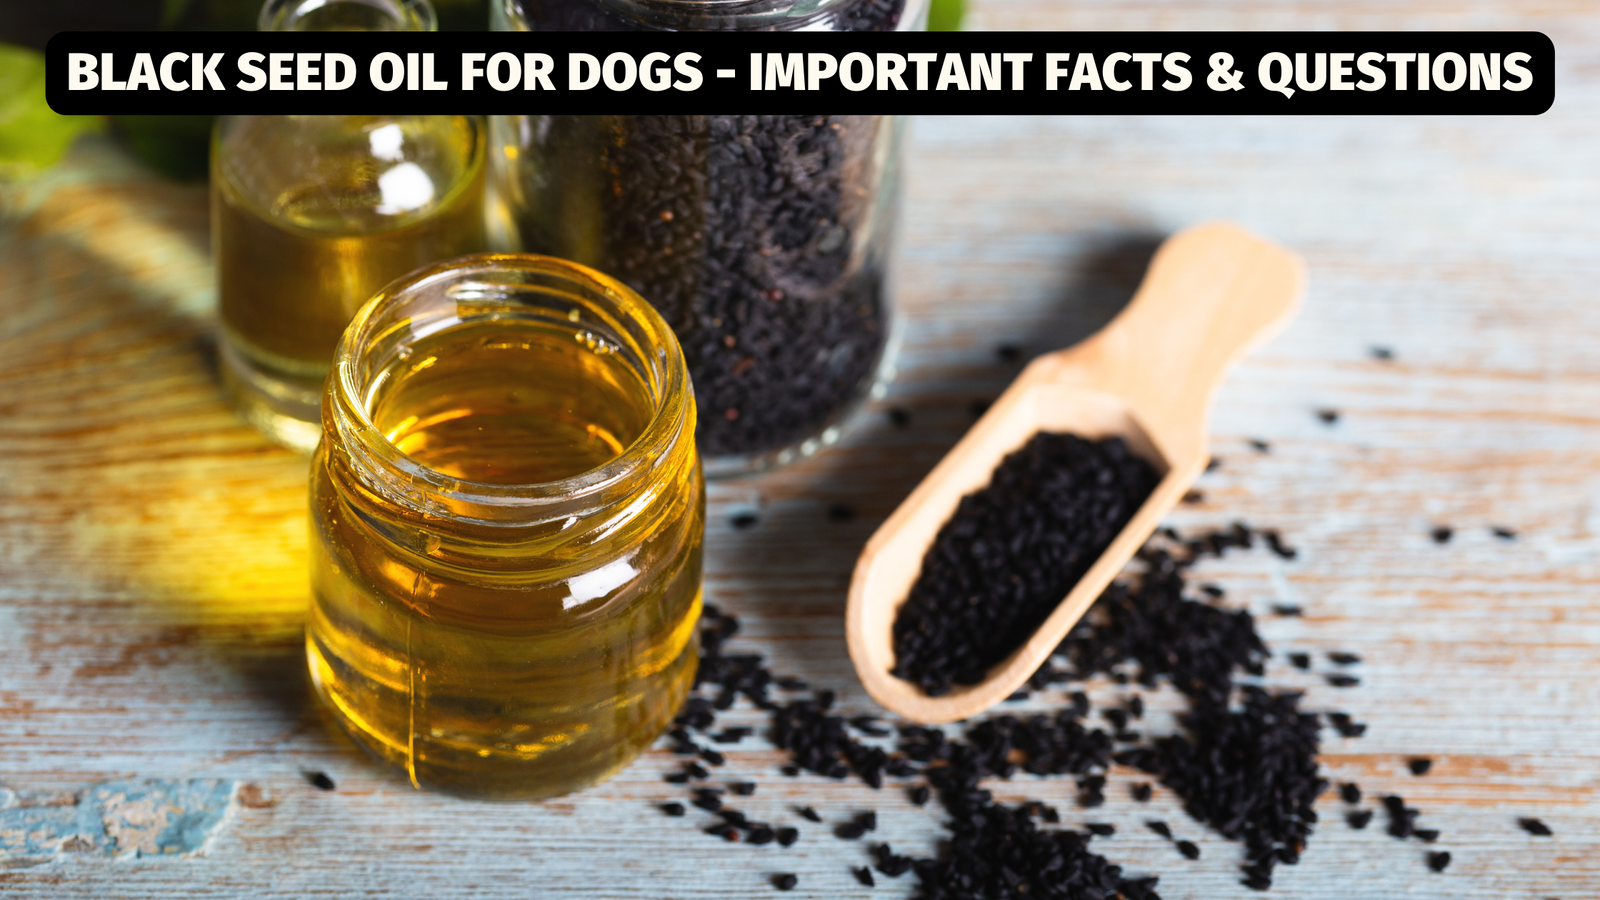 Black Seed Oil for Dogs - Important Facts & Questions